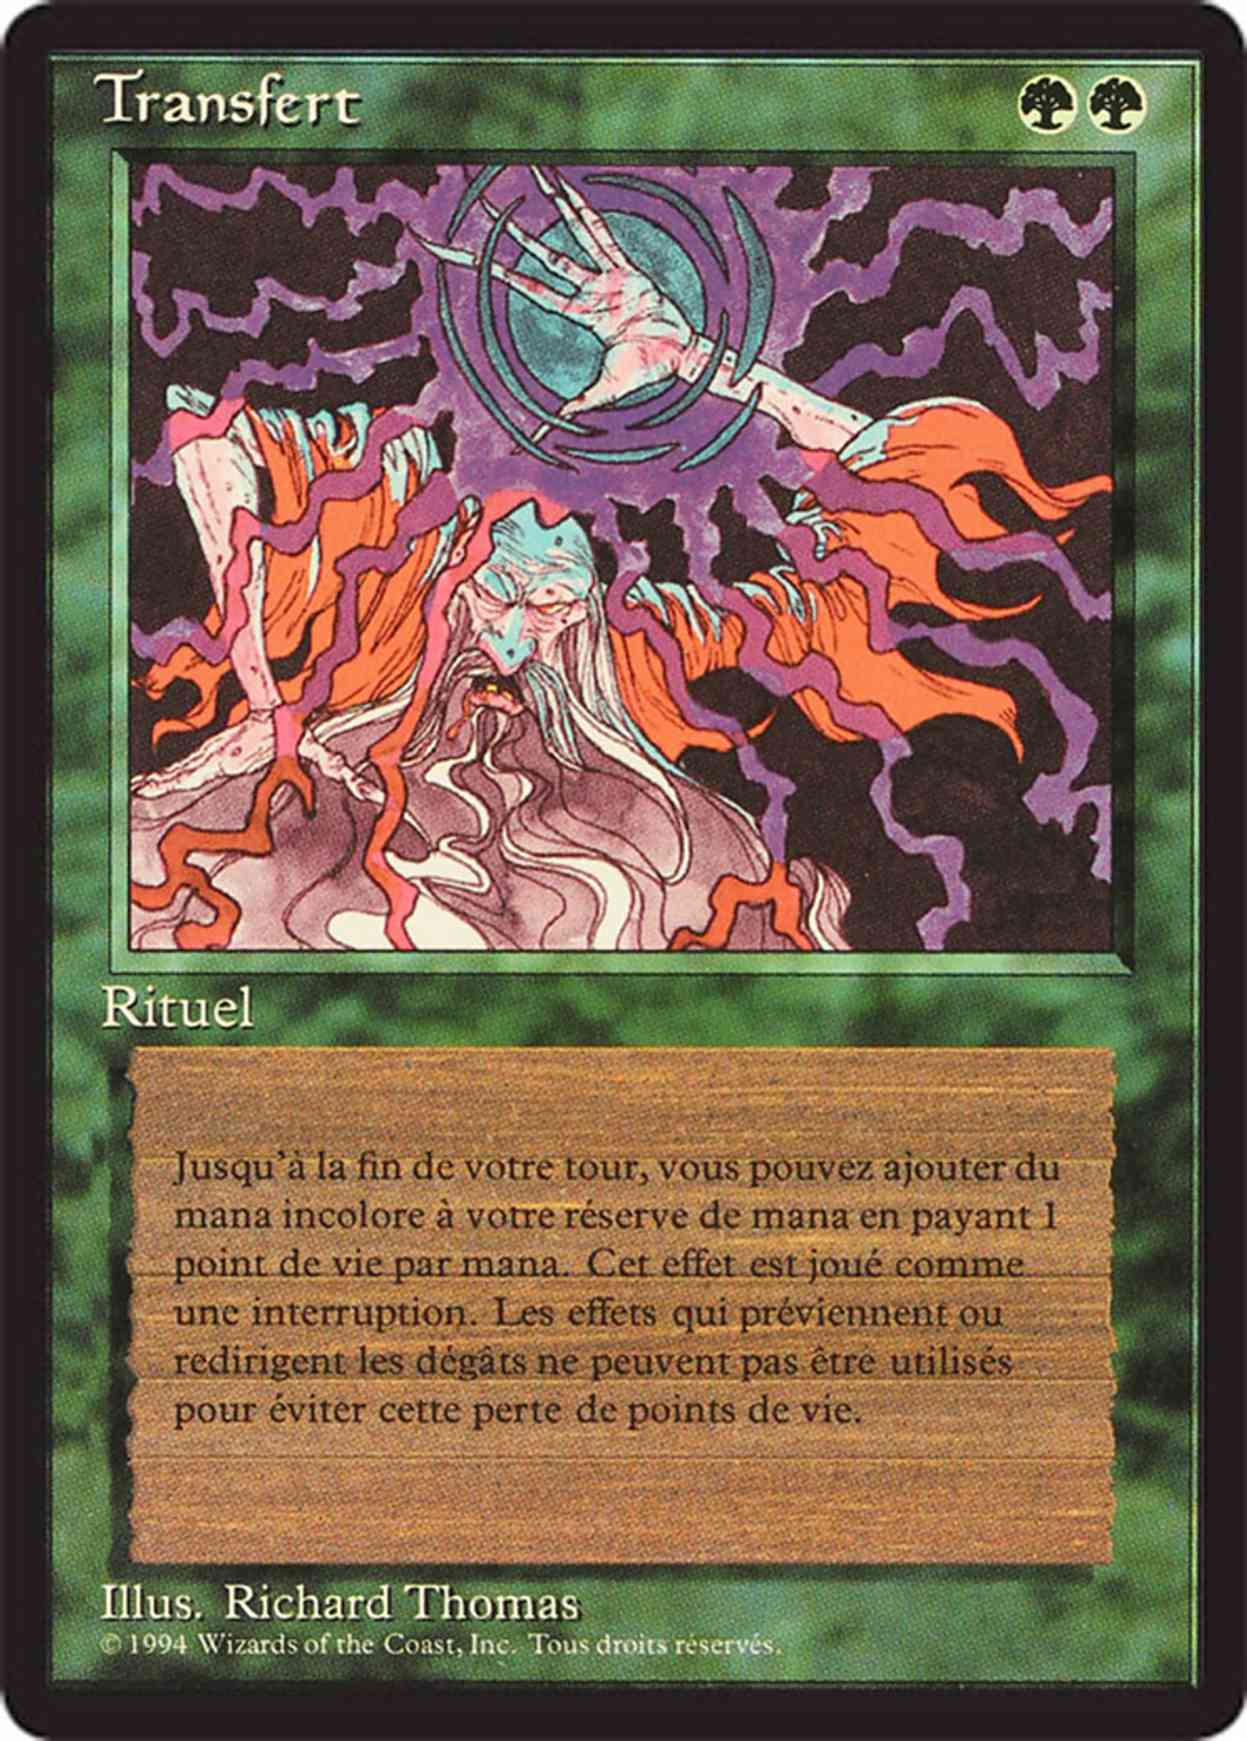 Channel magic card front